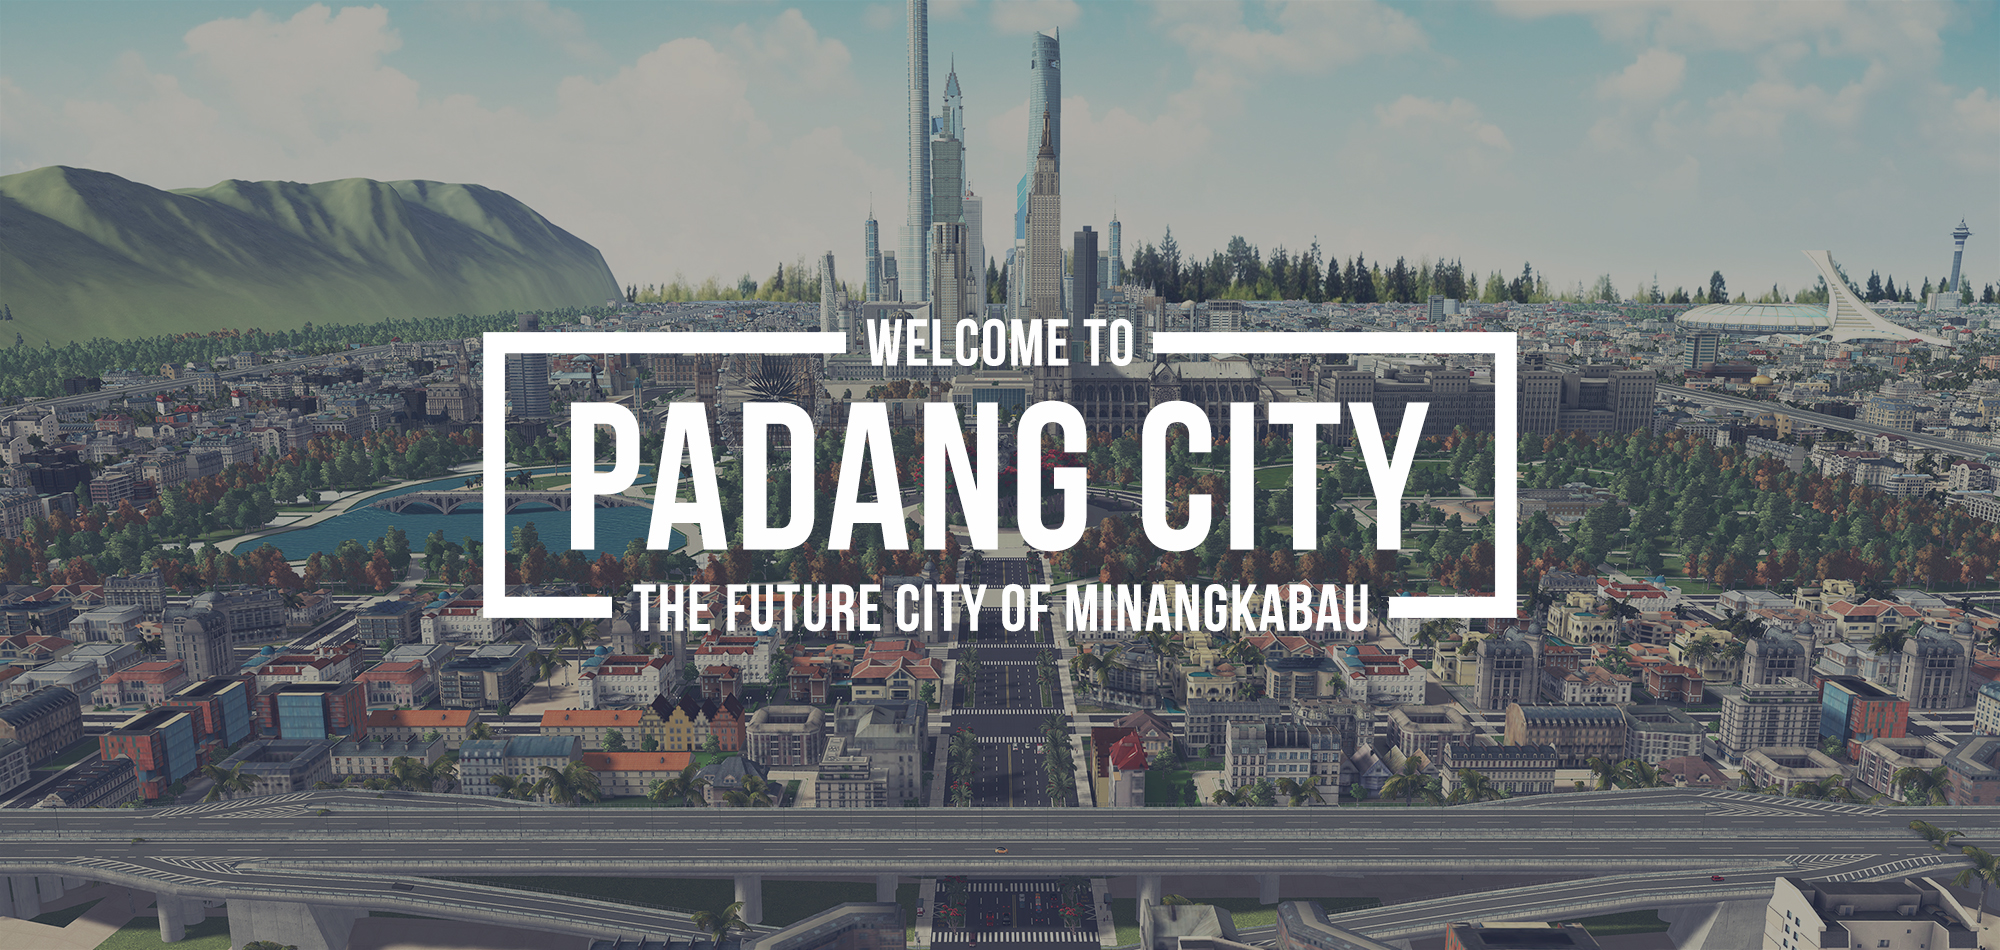 http://orig14.deviantart.net/5edf/f/2015/047/9/4/_cities_xl__welcome_to_padang_city_by_ovarz-d8i9yv5.jpg